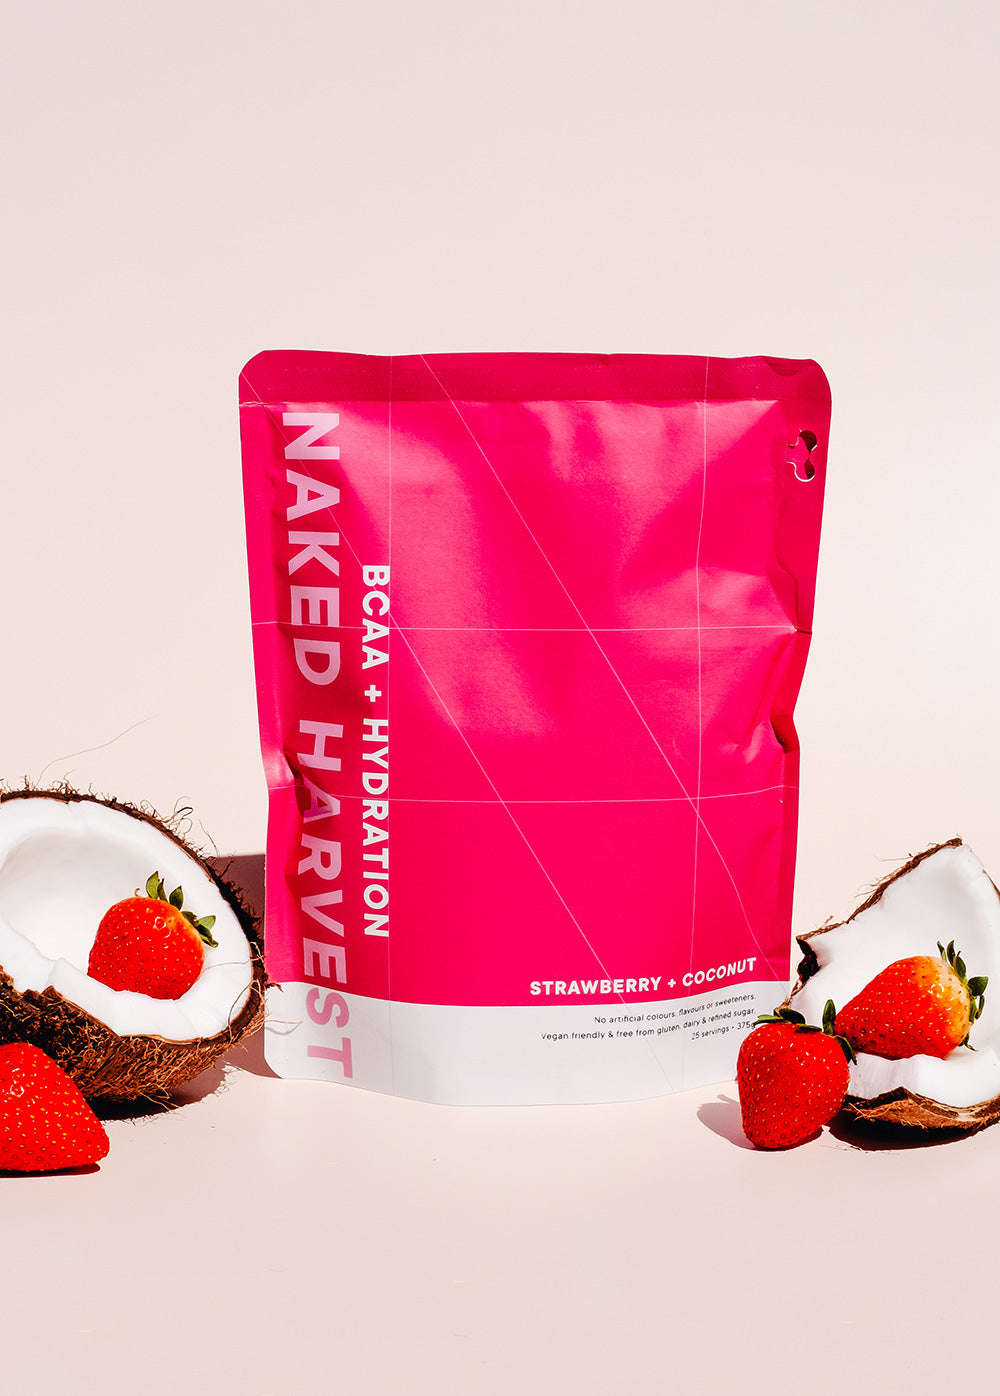 Strawberry Coconut - Expiring March 24